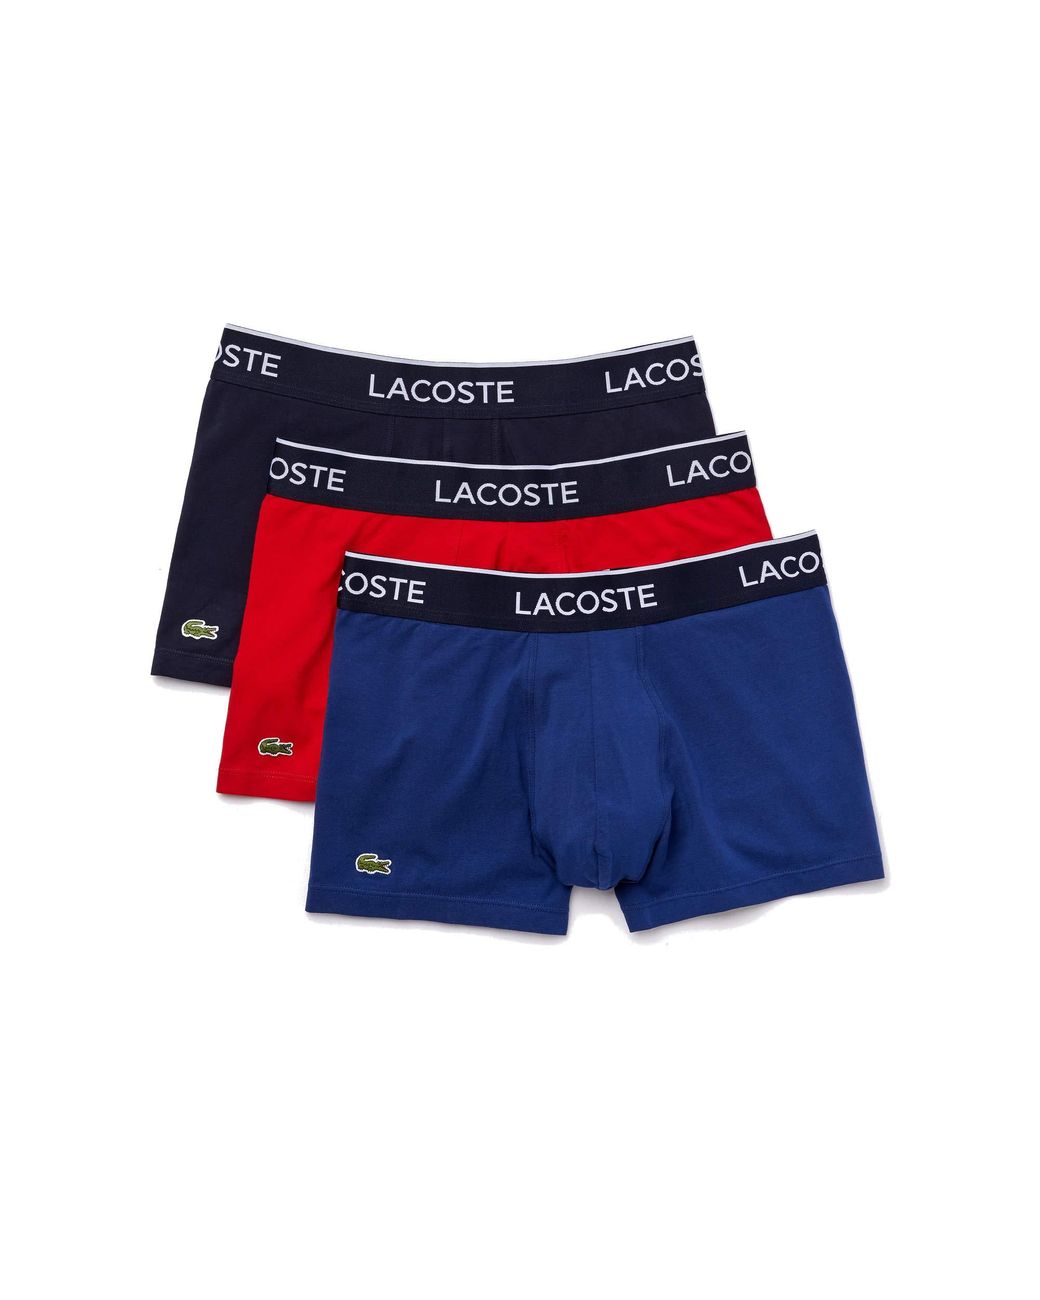 Lacoste Mens Casual Classic 3 Pack Cotton Stretch Trunks